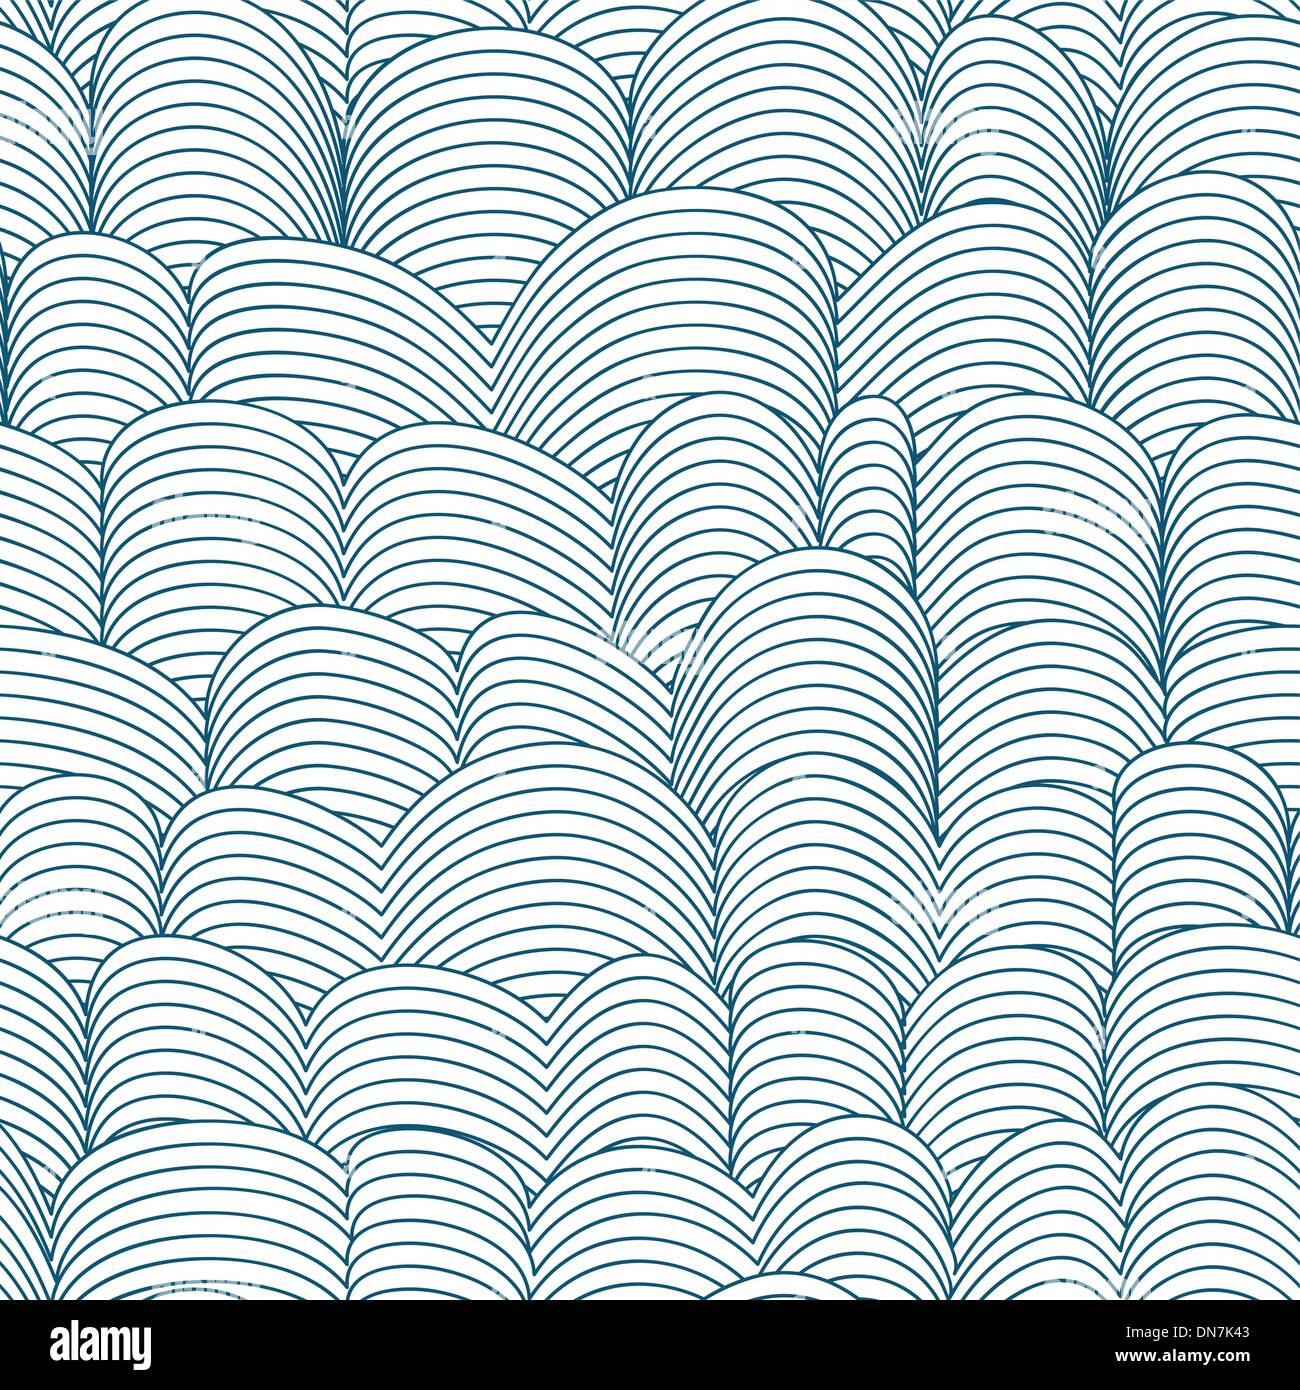 Seamless Abstract  Waves Pattern Stock Vector